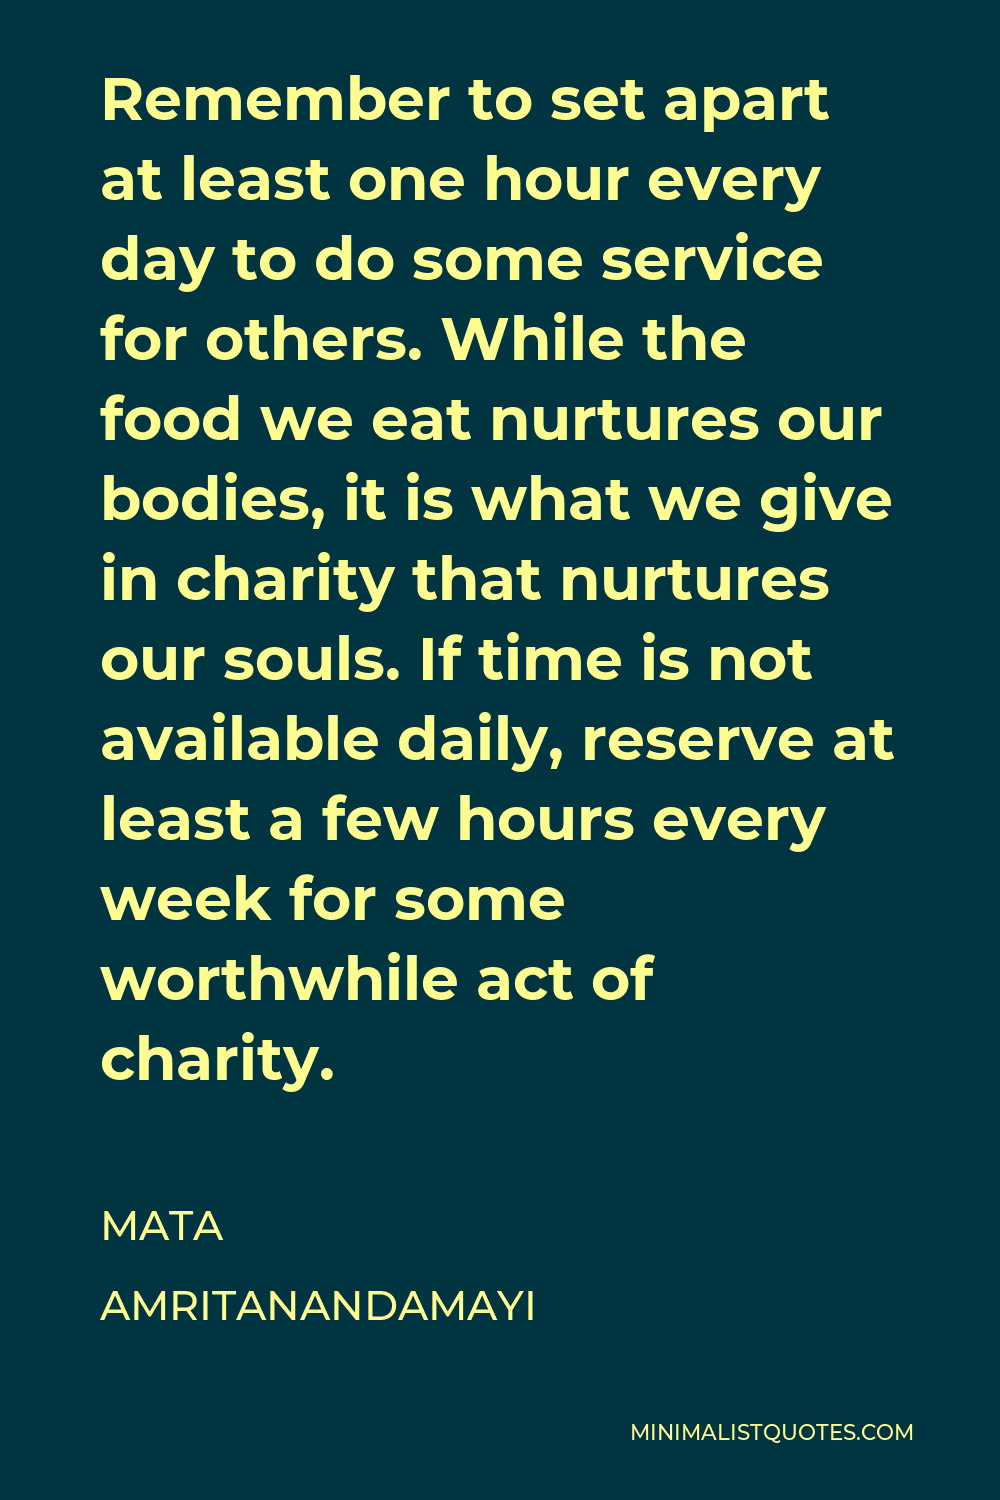 Mata Amritanandamayi Quote - Remember to set apart at least one hour every day to do some service for others. While the food we eat nurtures our bodies, it is what we give in charity that nurtures our souls. If time is not available daily, reserve at least a few hours every week for some worthwhile act of charity.